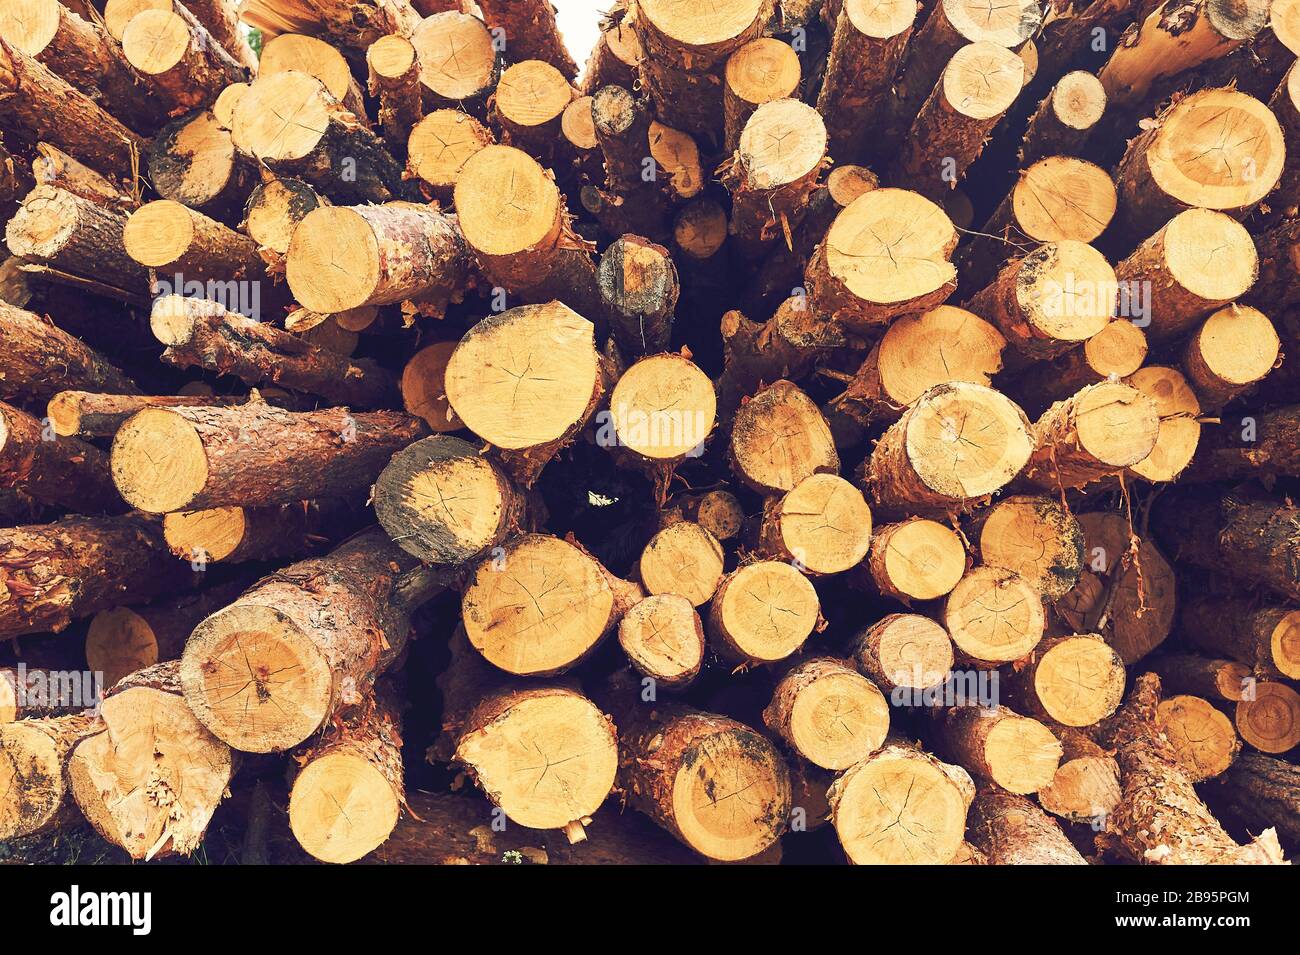 Natural wooden logs cut and stacked in pile, felled by the logging timber industry, Abstract photo of a pile of natural wooden logs background Stock Photo